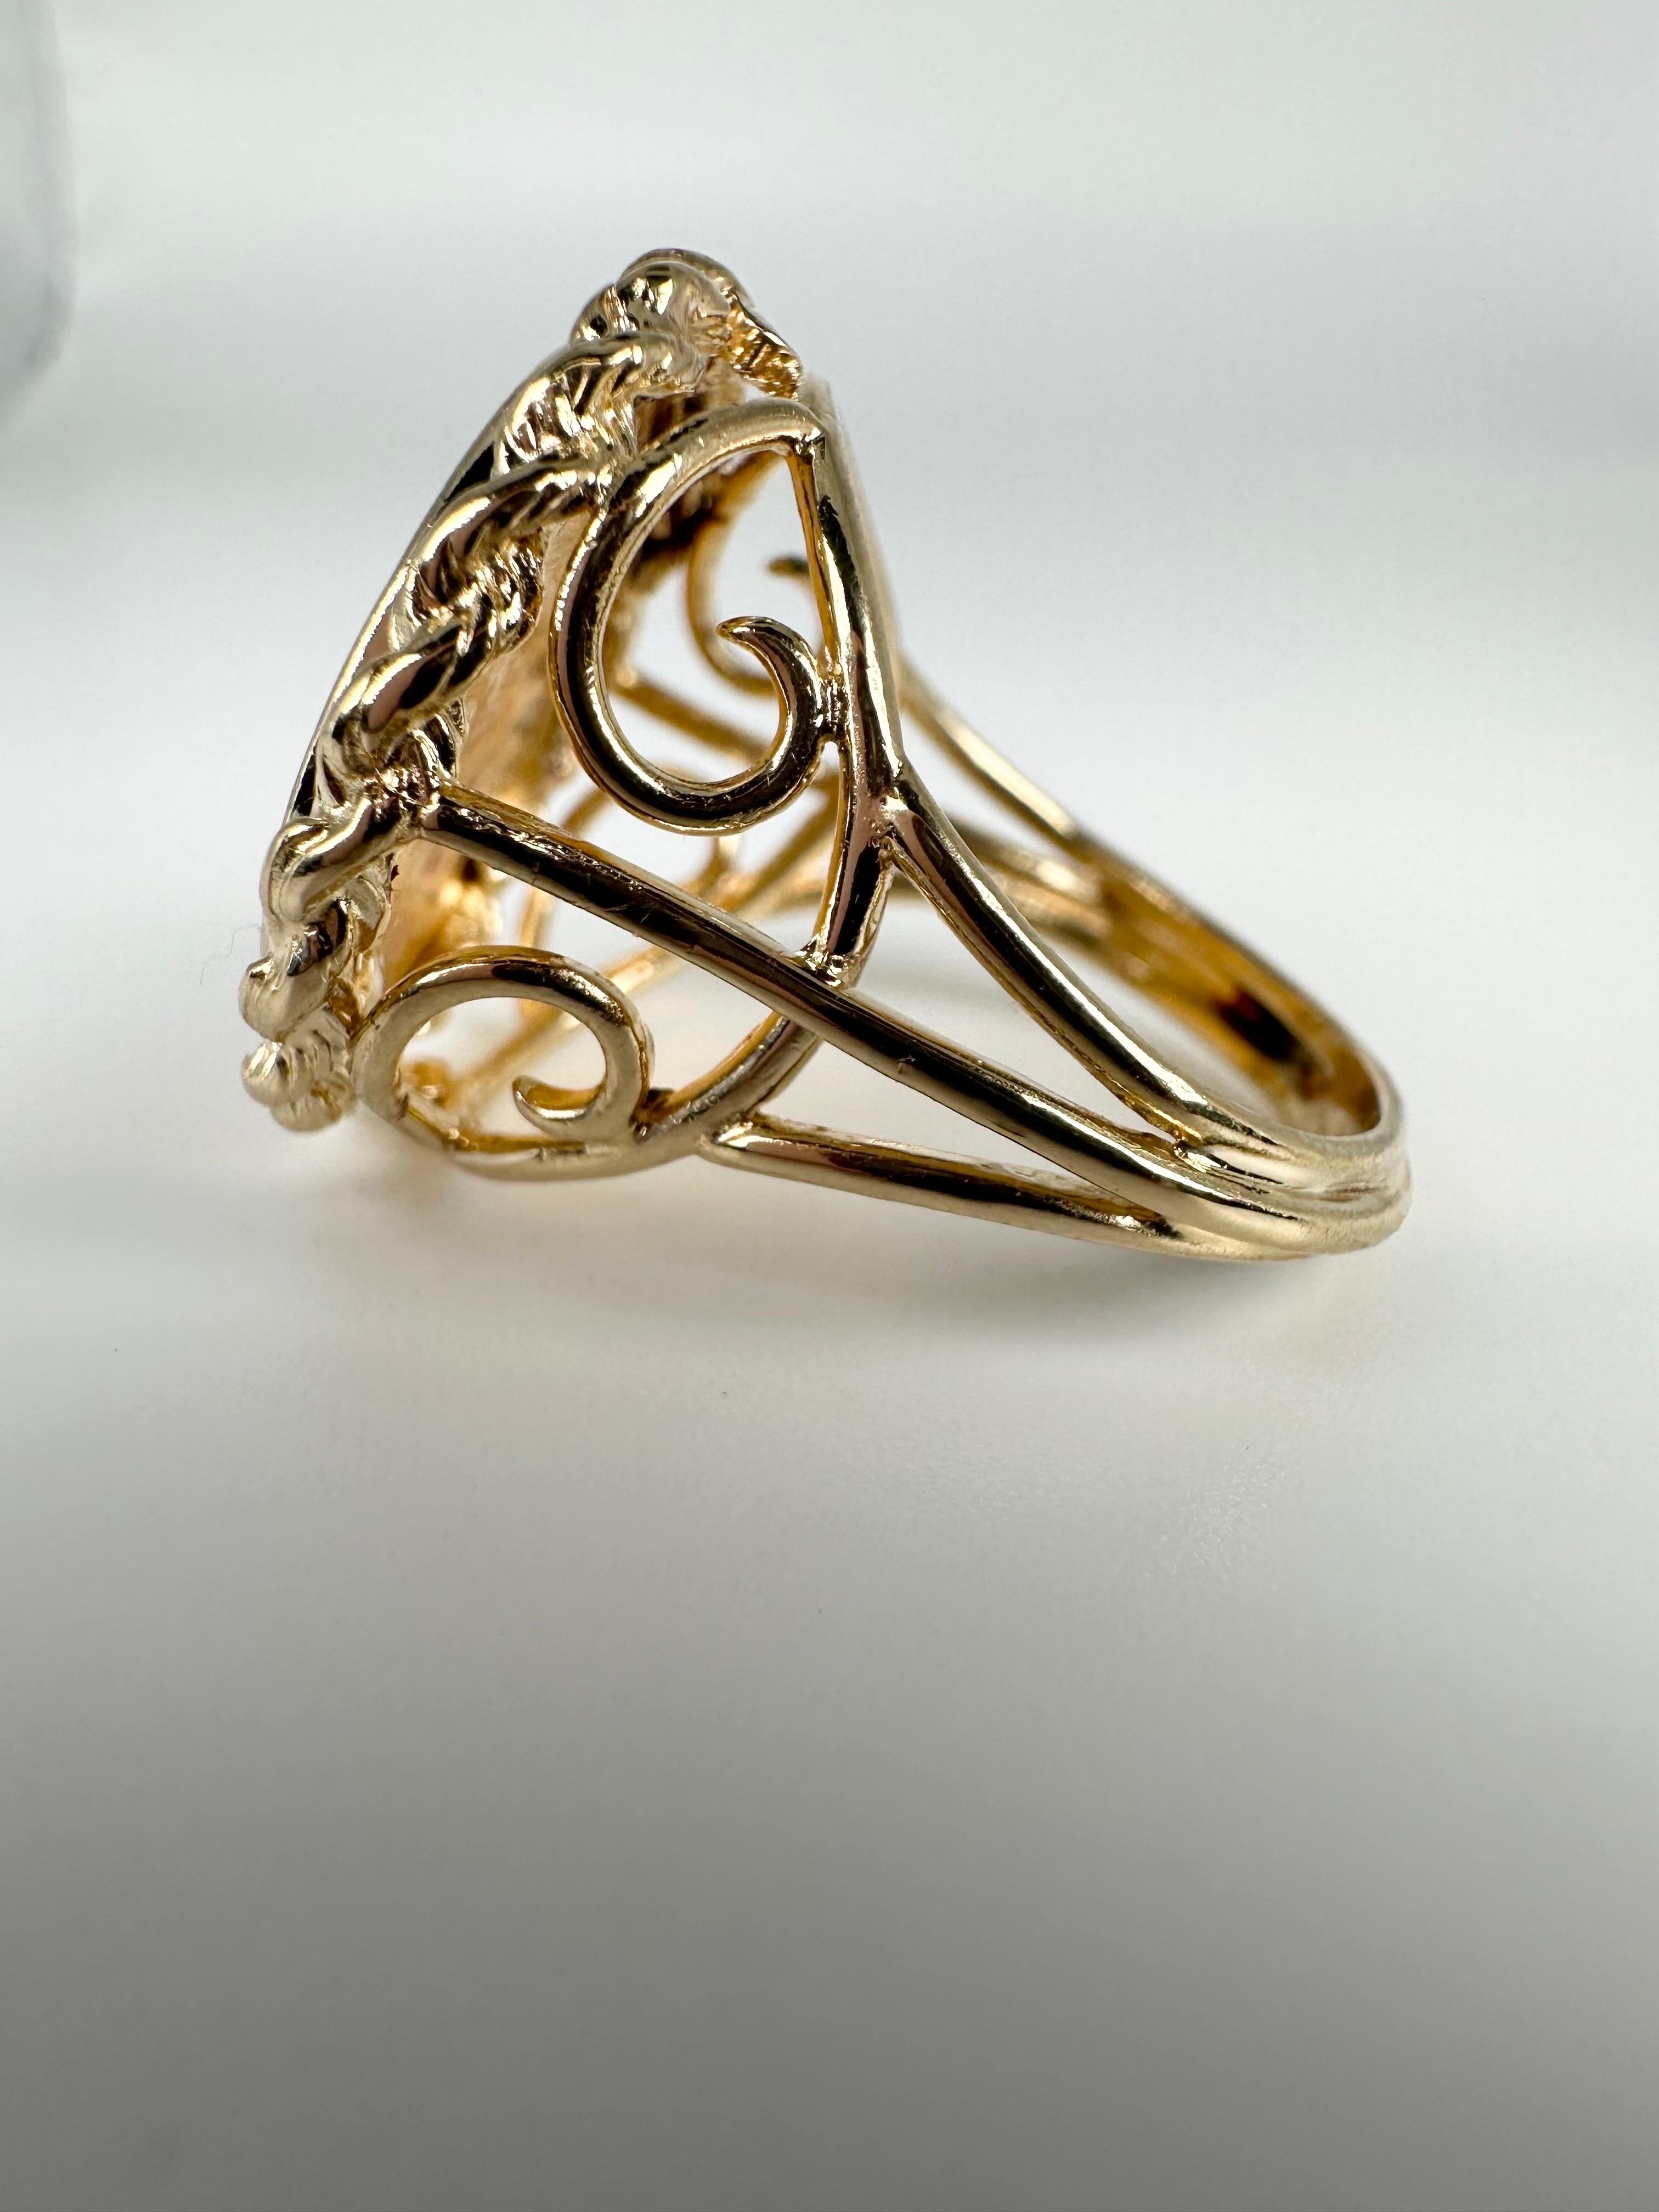 5 dollars liberty coin ring in 14KT yellow gold.

GOLD: 14KT gold

Grams:9.52
size: 7
Item#: 410-00016EET

WHAT YOU GET AT STAMPAR JEWELERS:
Stampar Jewelers, located in the heart of Jupiter, Florida, is a custom jewelry store and studio dedicated